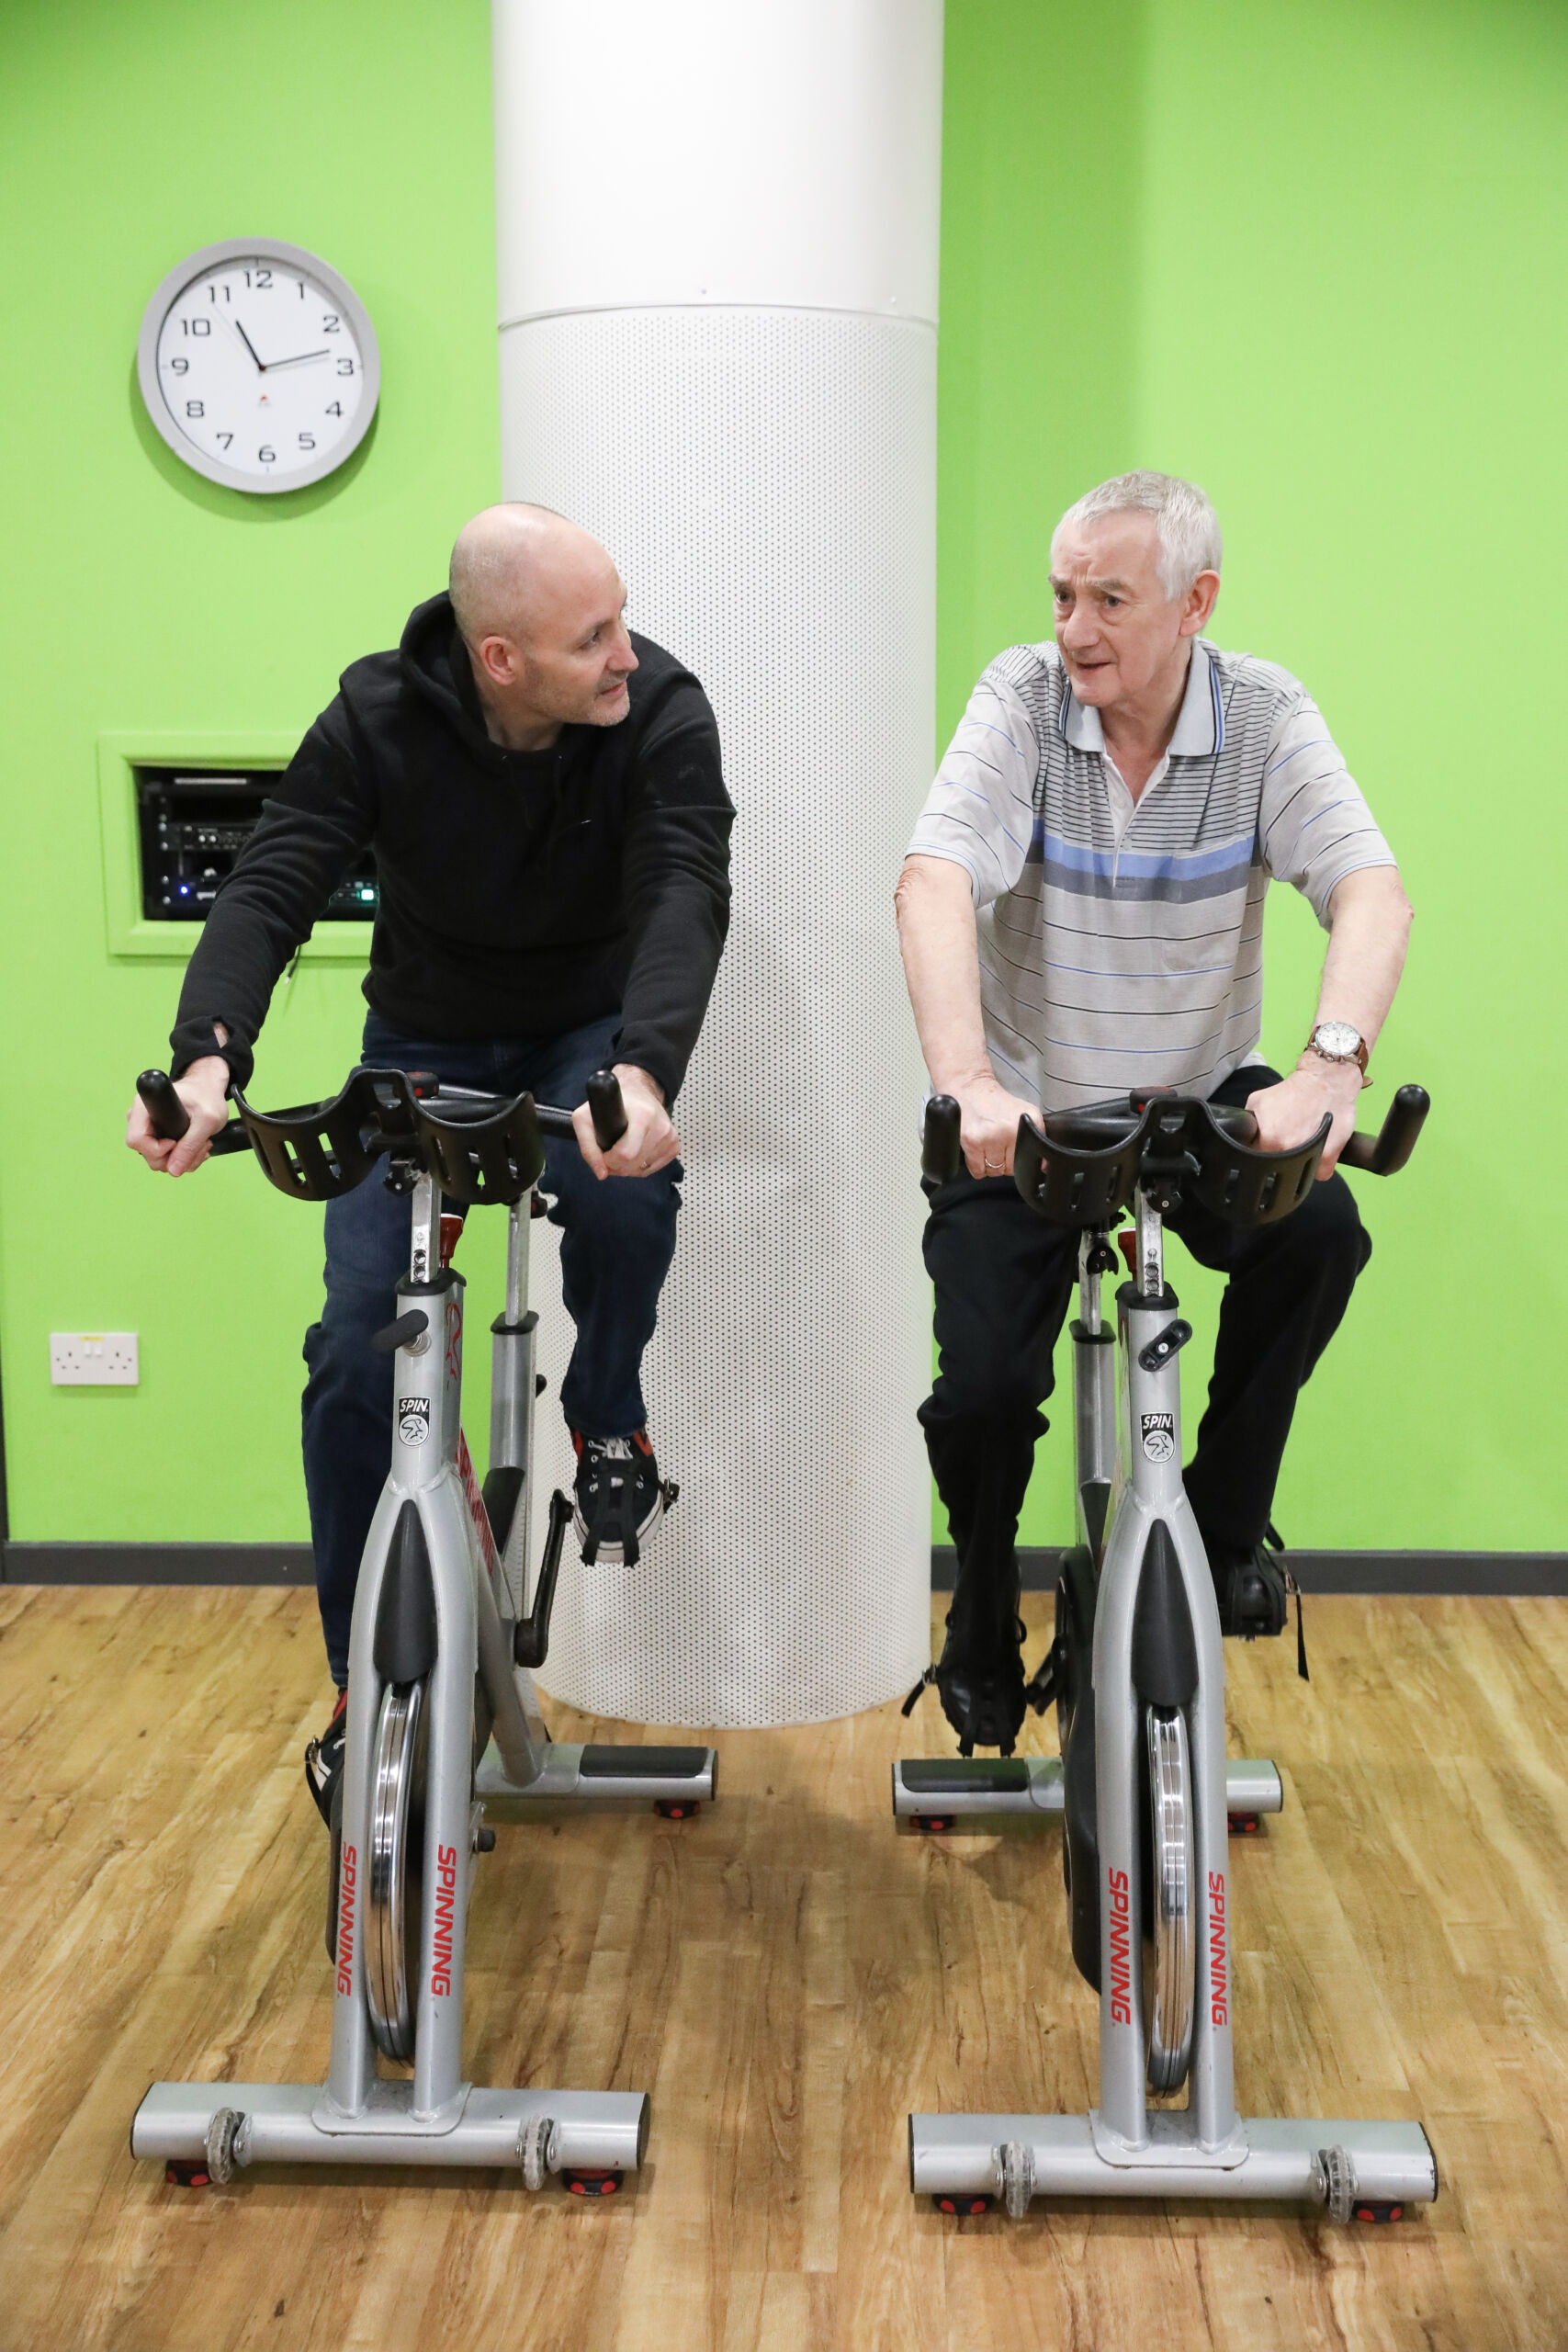 Two Prehab4Cancer participants on exercise bikes